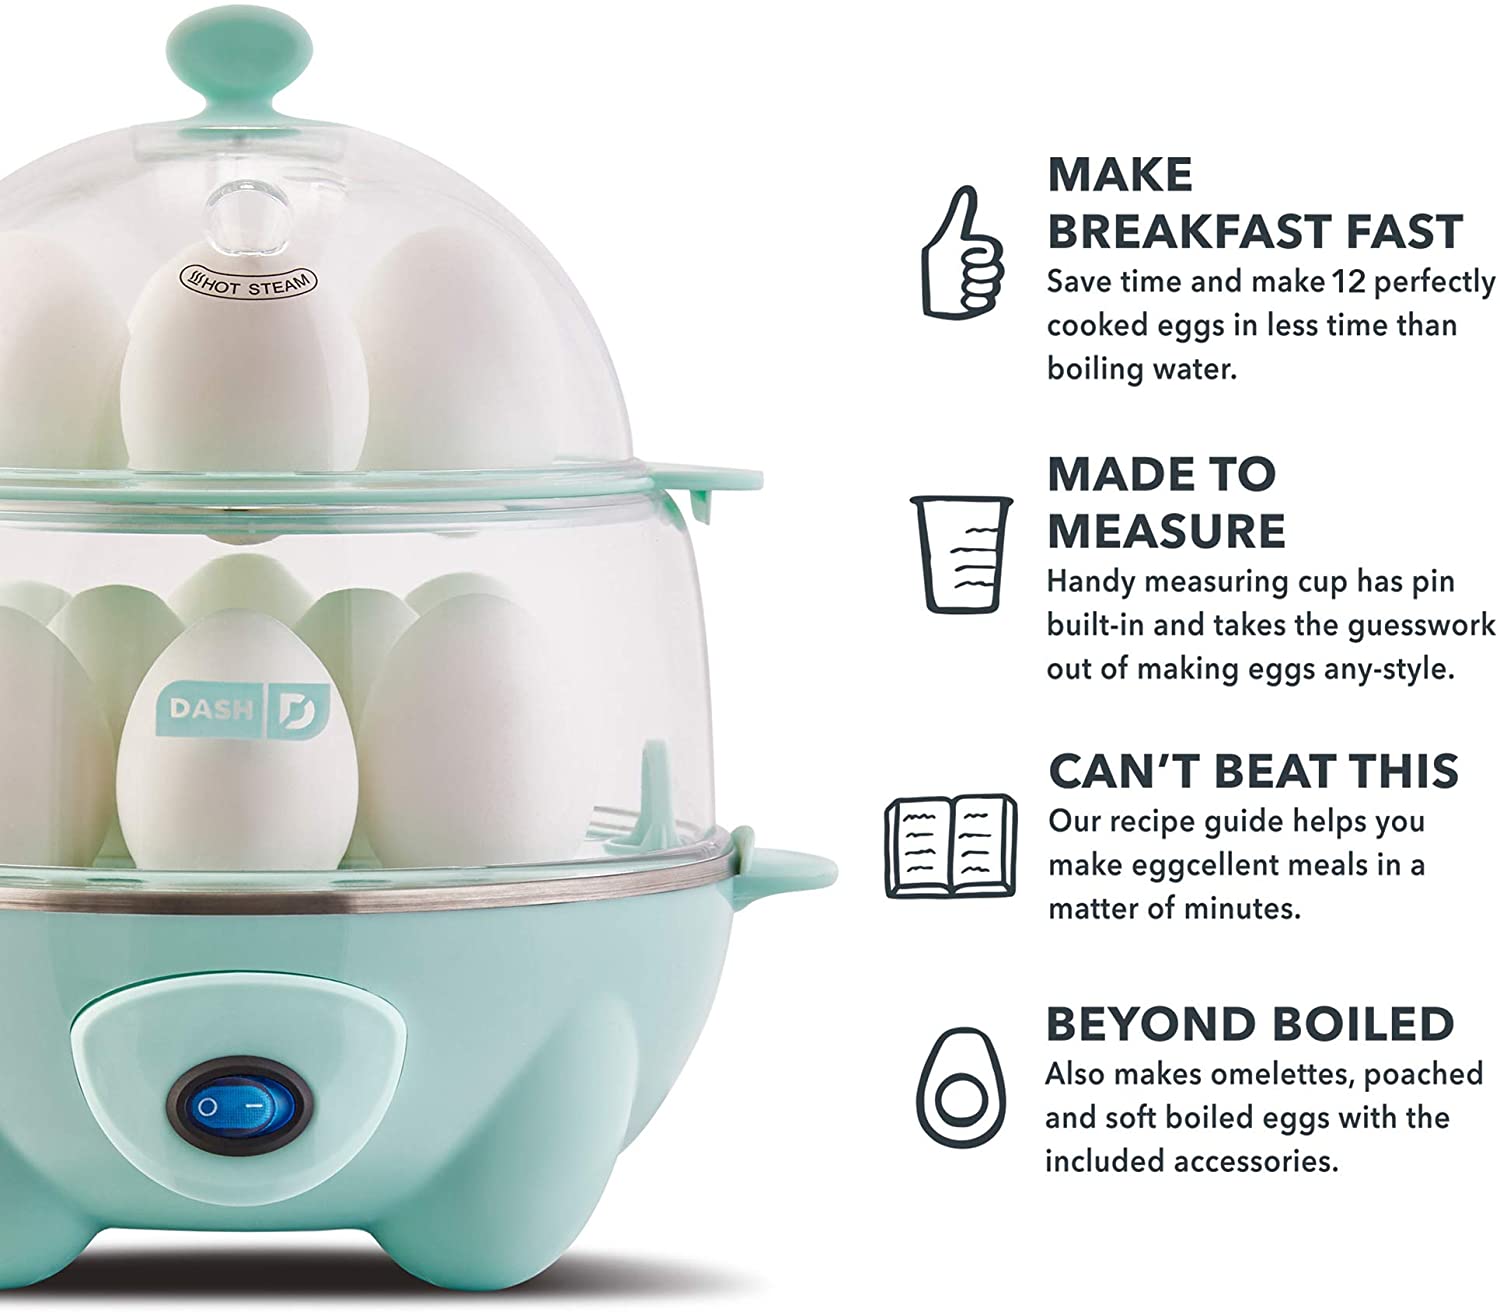 The Dash Rapid Egg Cooker Makes Any Style Egg In Minutes